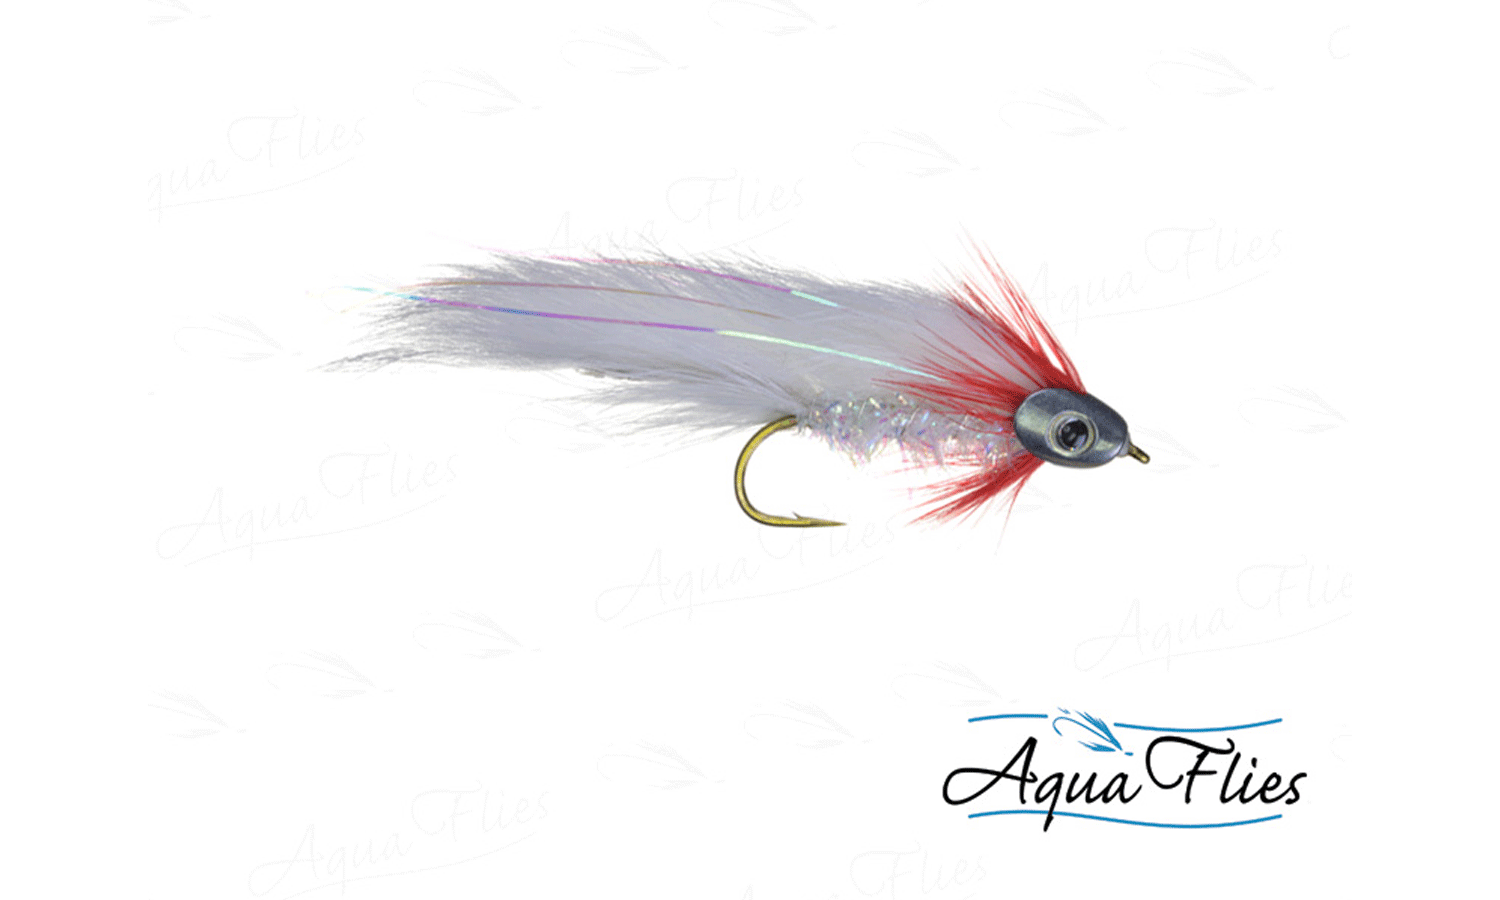 BARBLESS Zonker Trout Flies 6 pack White Barbless Zonkers Size 10, 